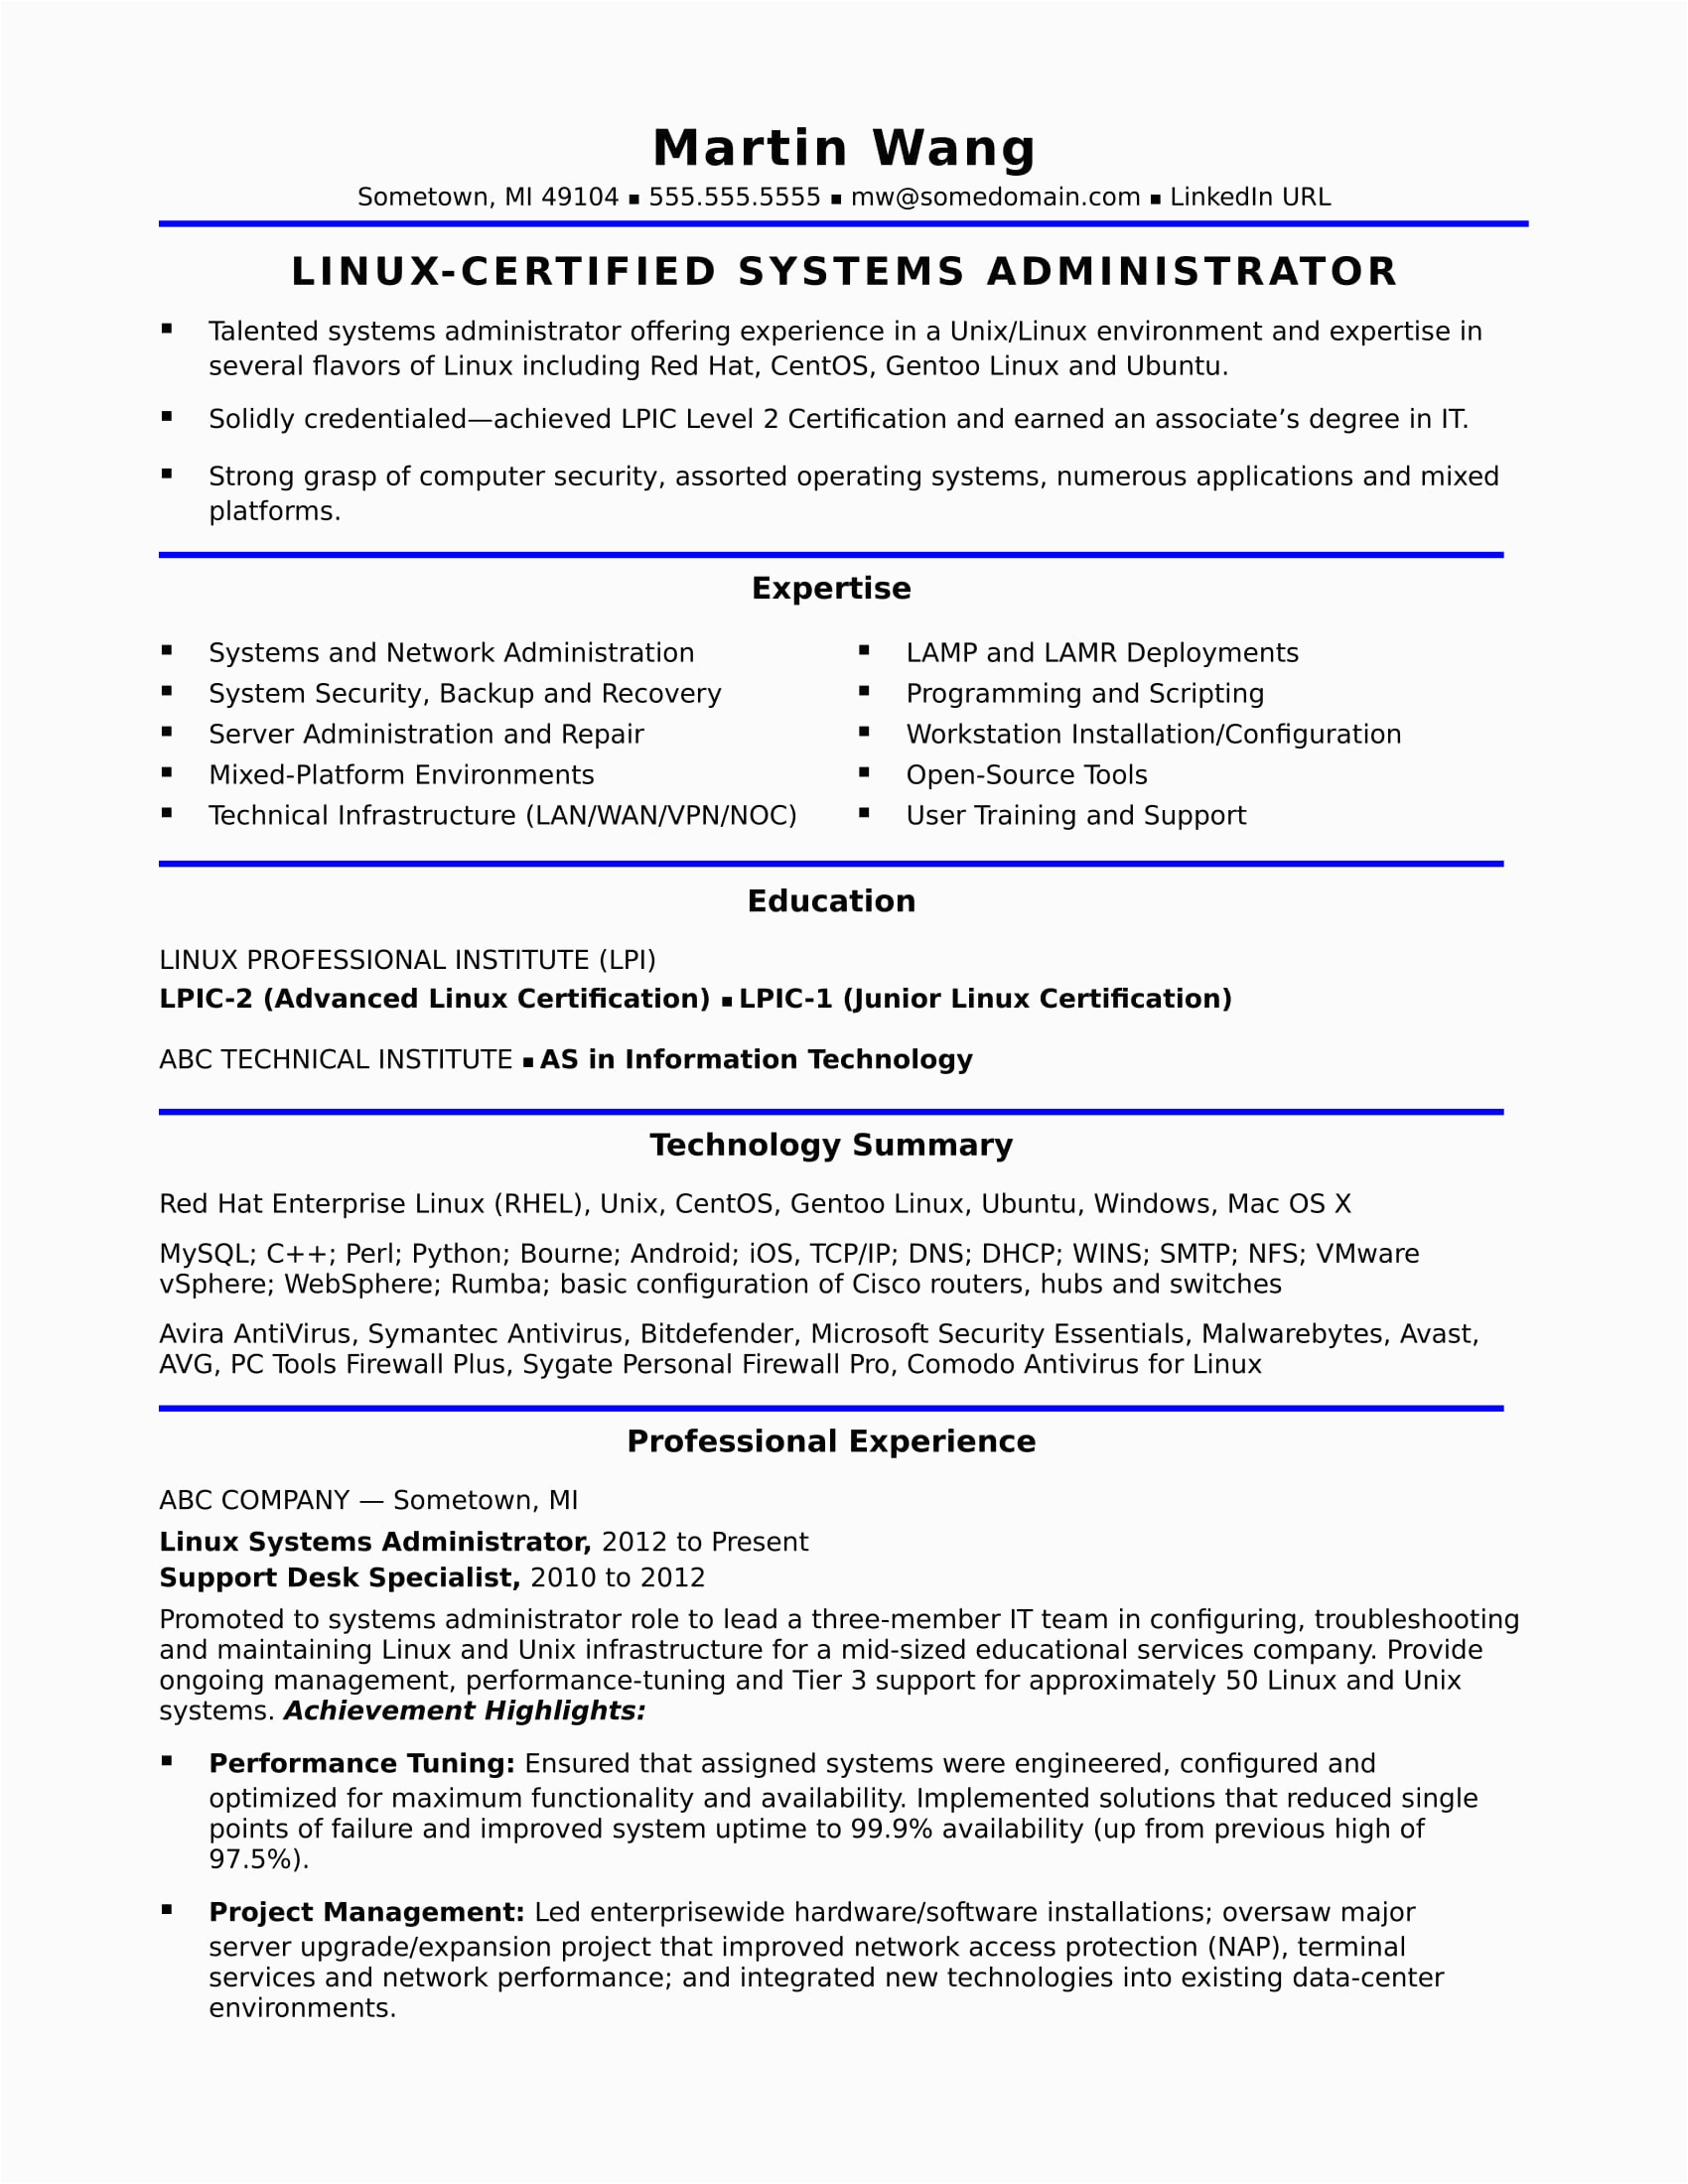 Sample Resume for Administration Manager In India Sample Resume for A Midlevel Systems Administrator